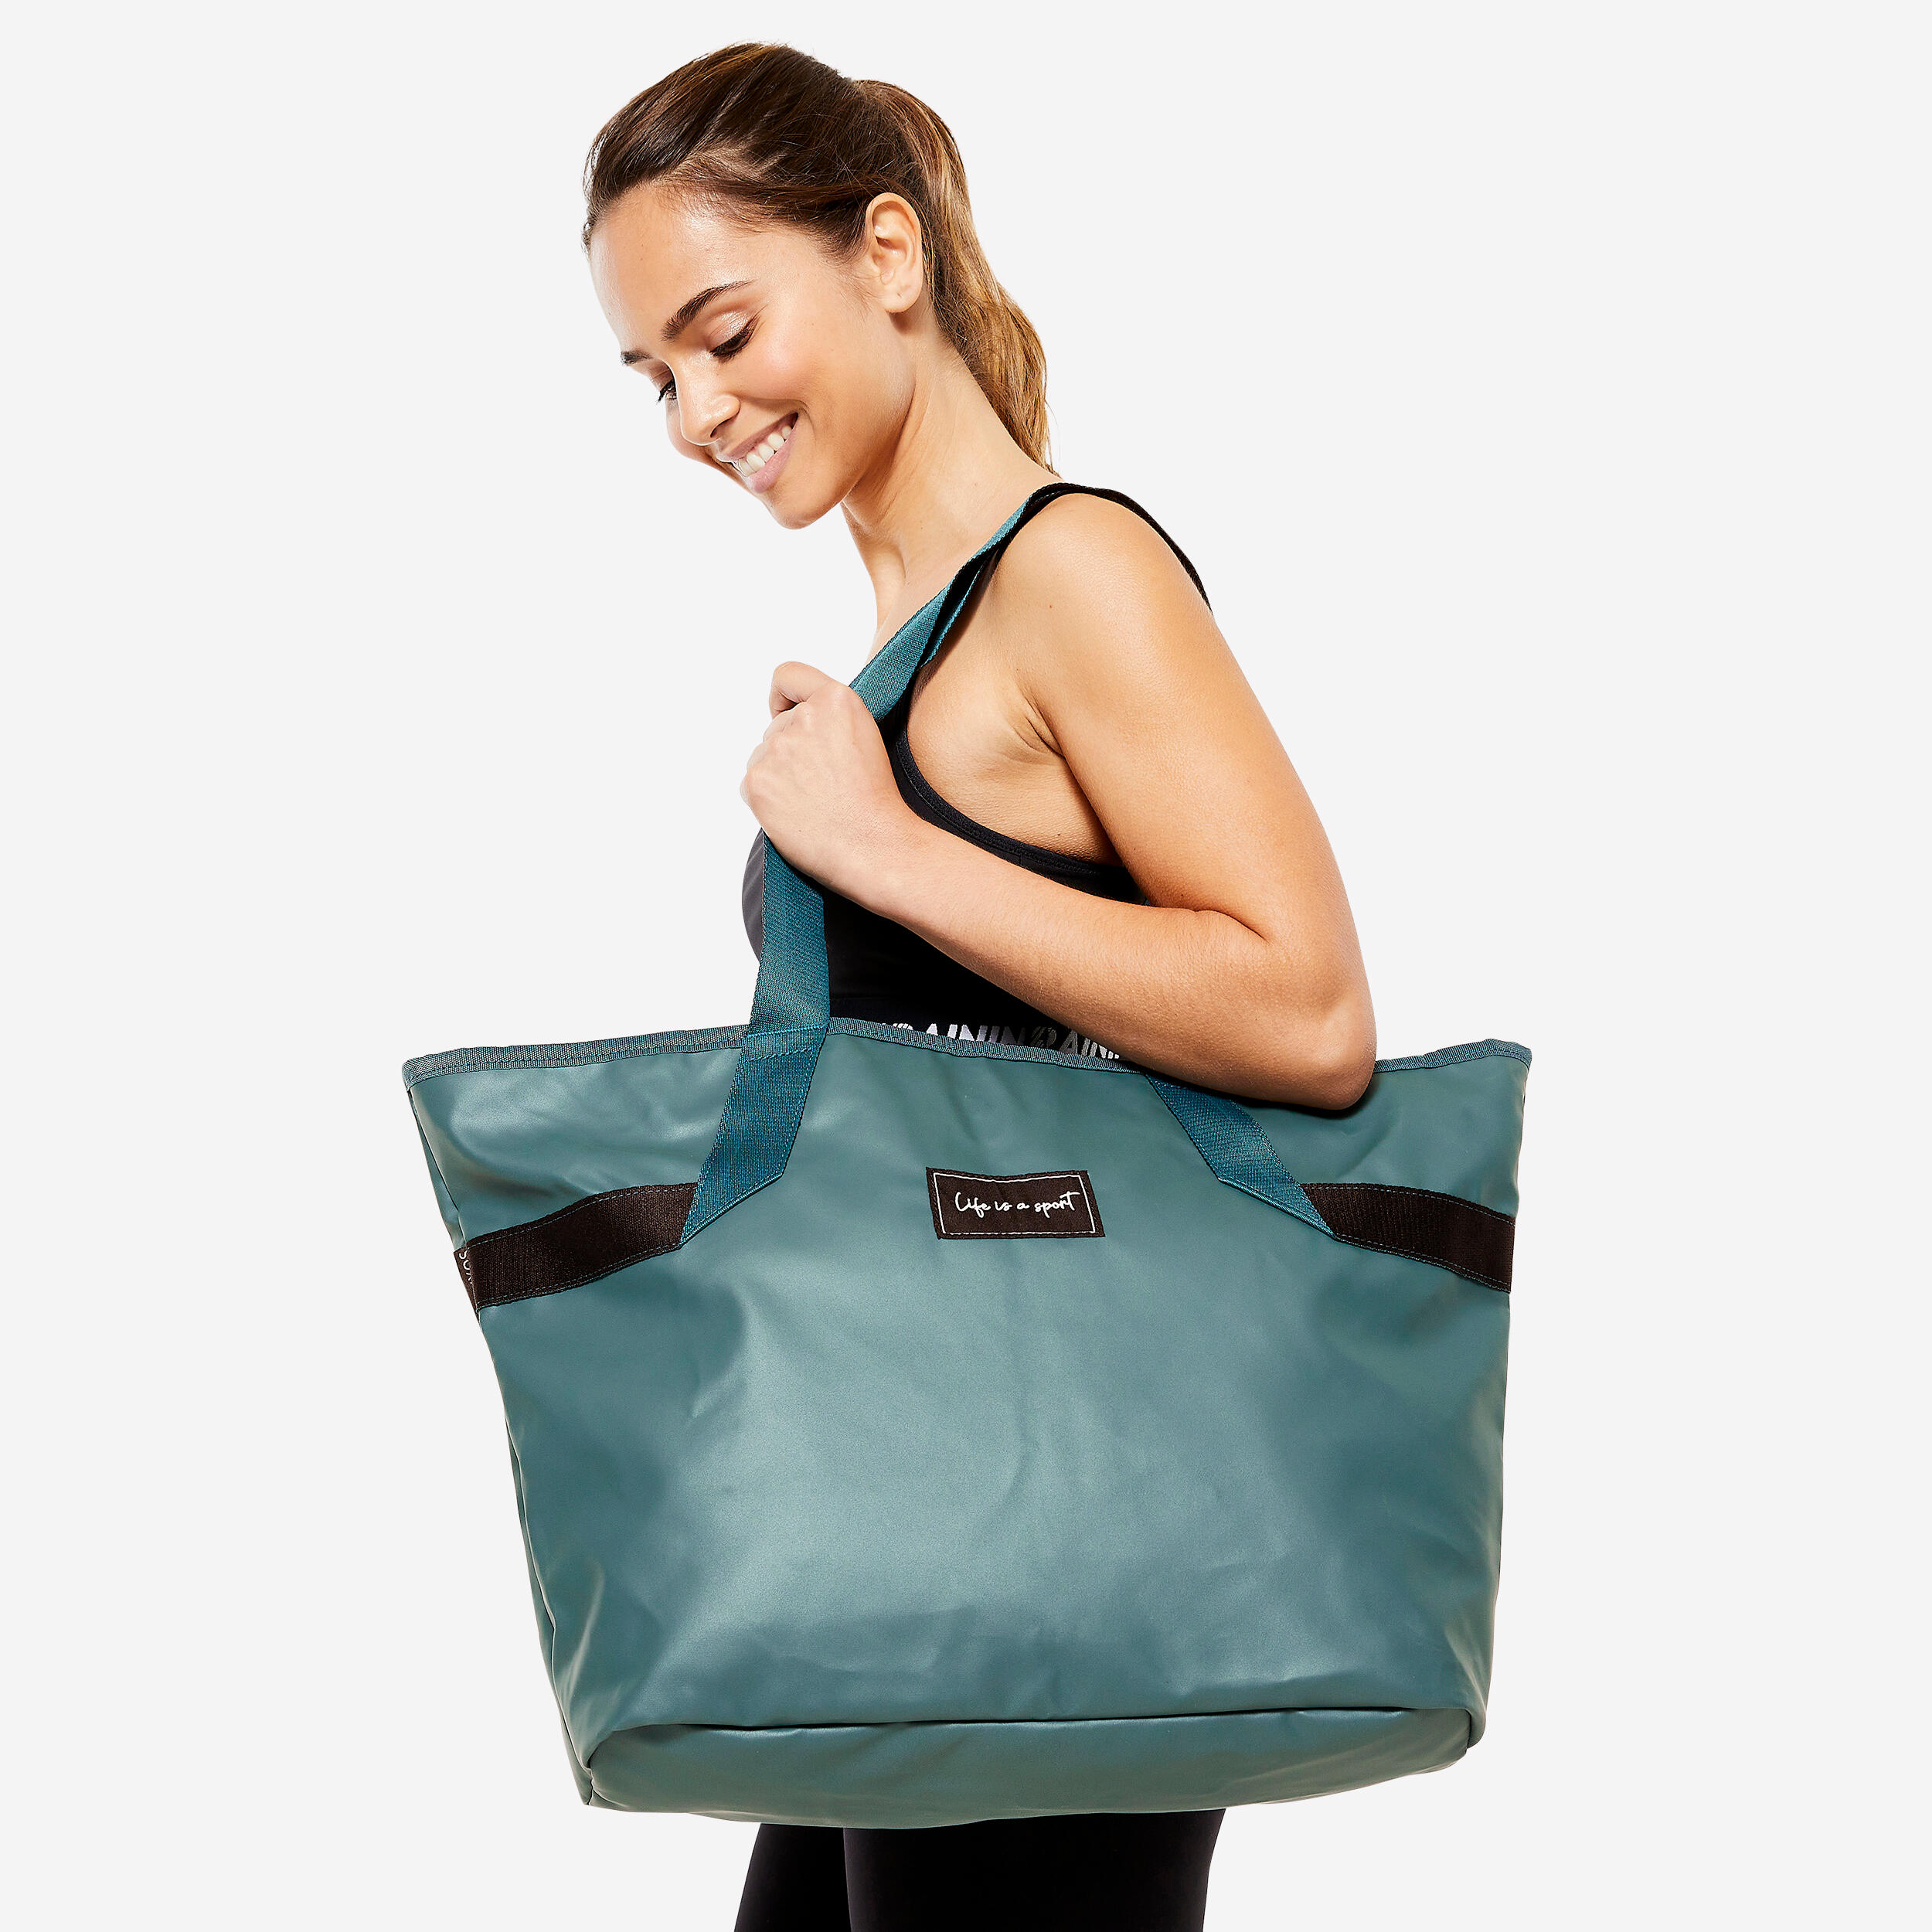 DOMYOS Women's 25 L Bag with Pockets - Turquoise